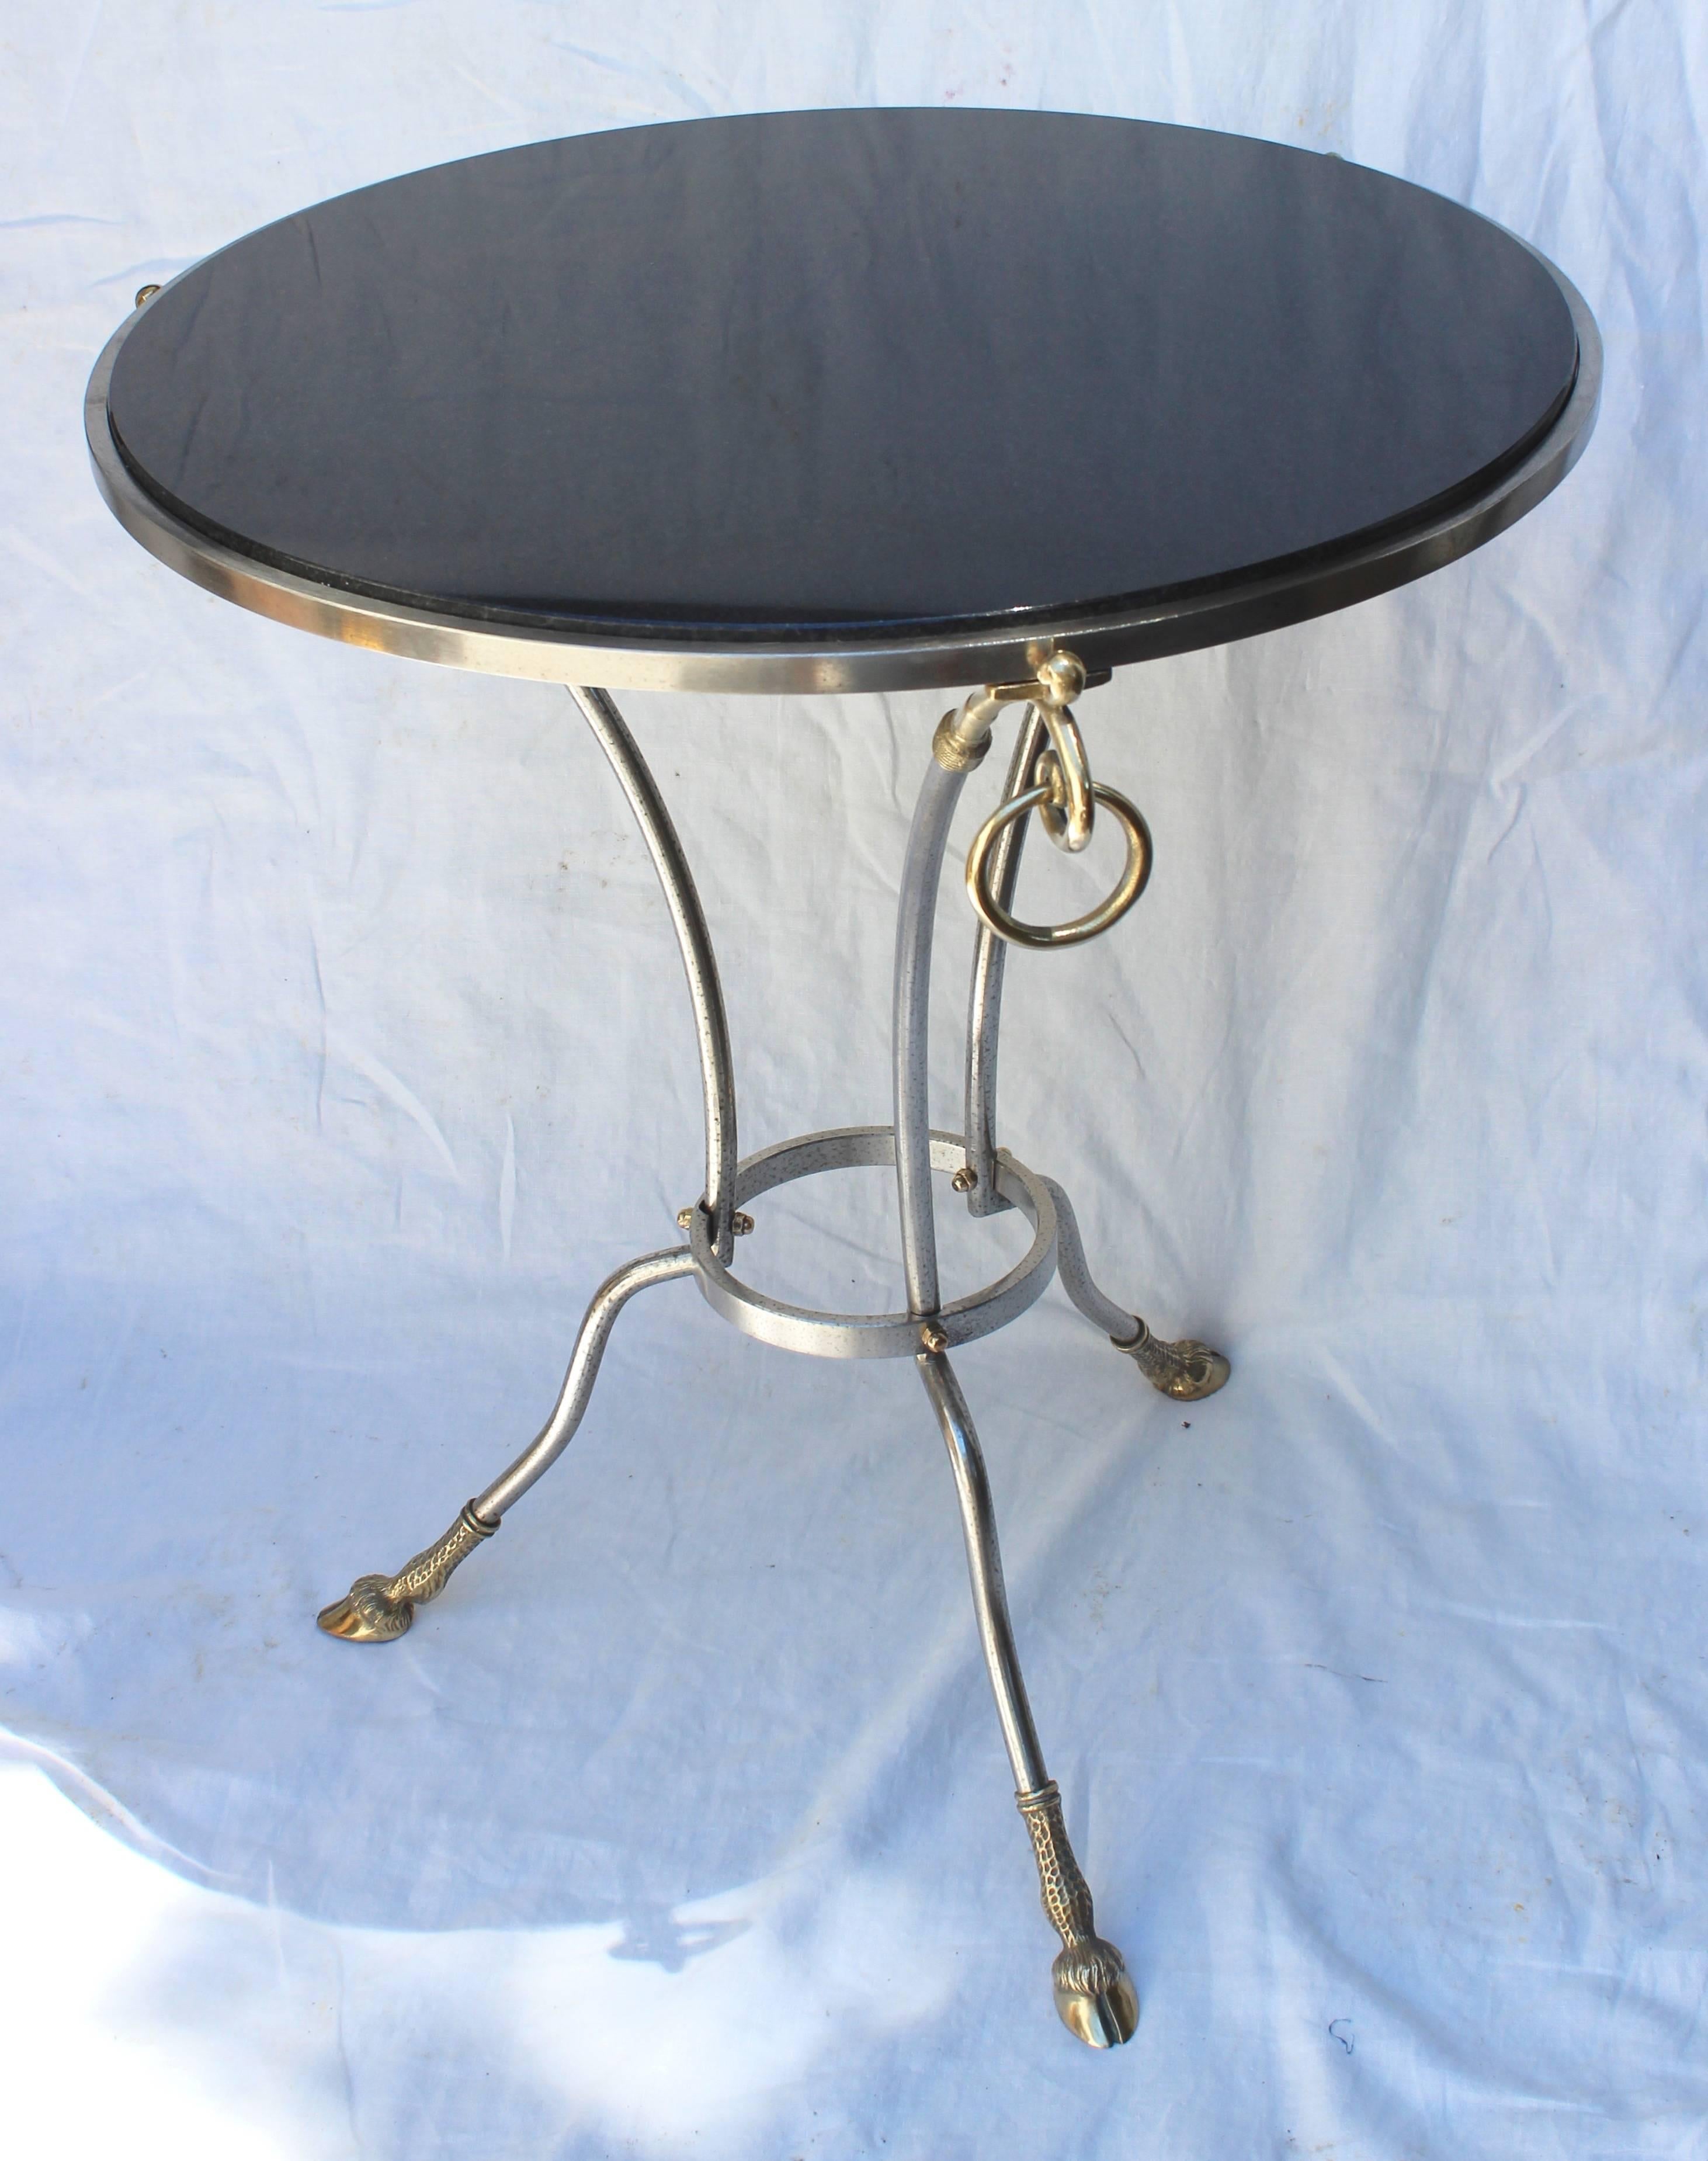 Jansen Style Round Table In Good Condition For Sale In East Hampton, NY